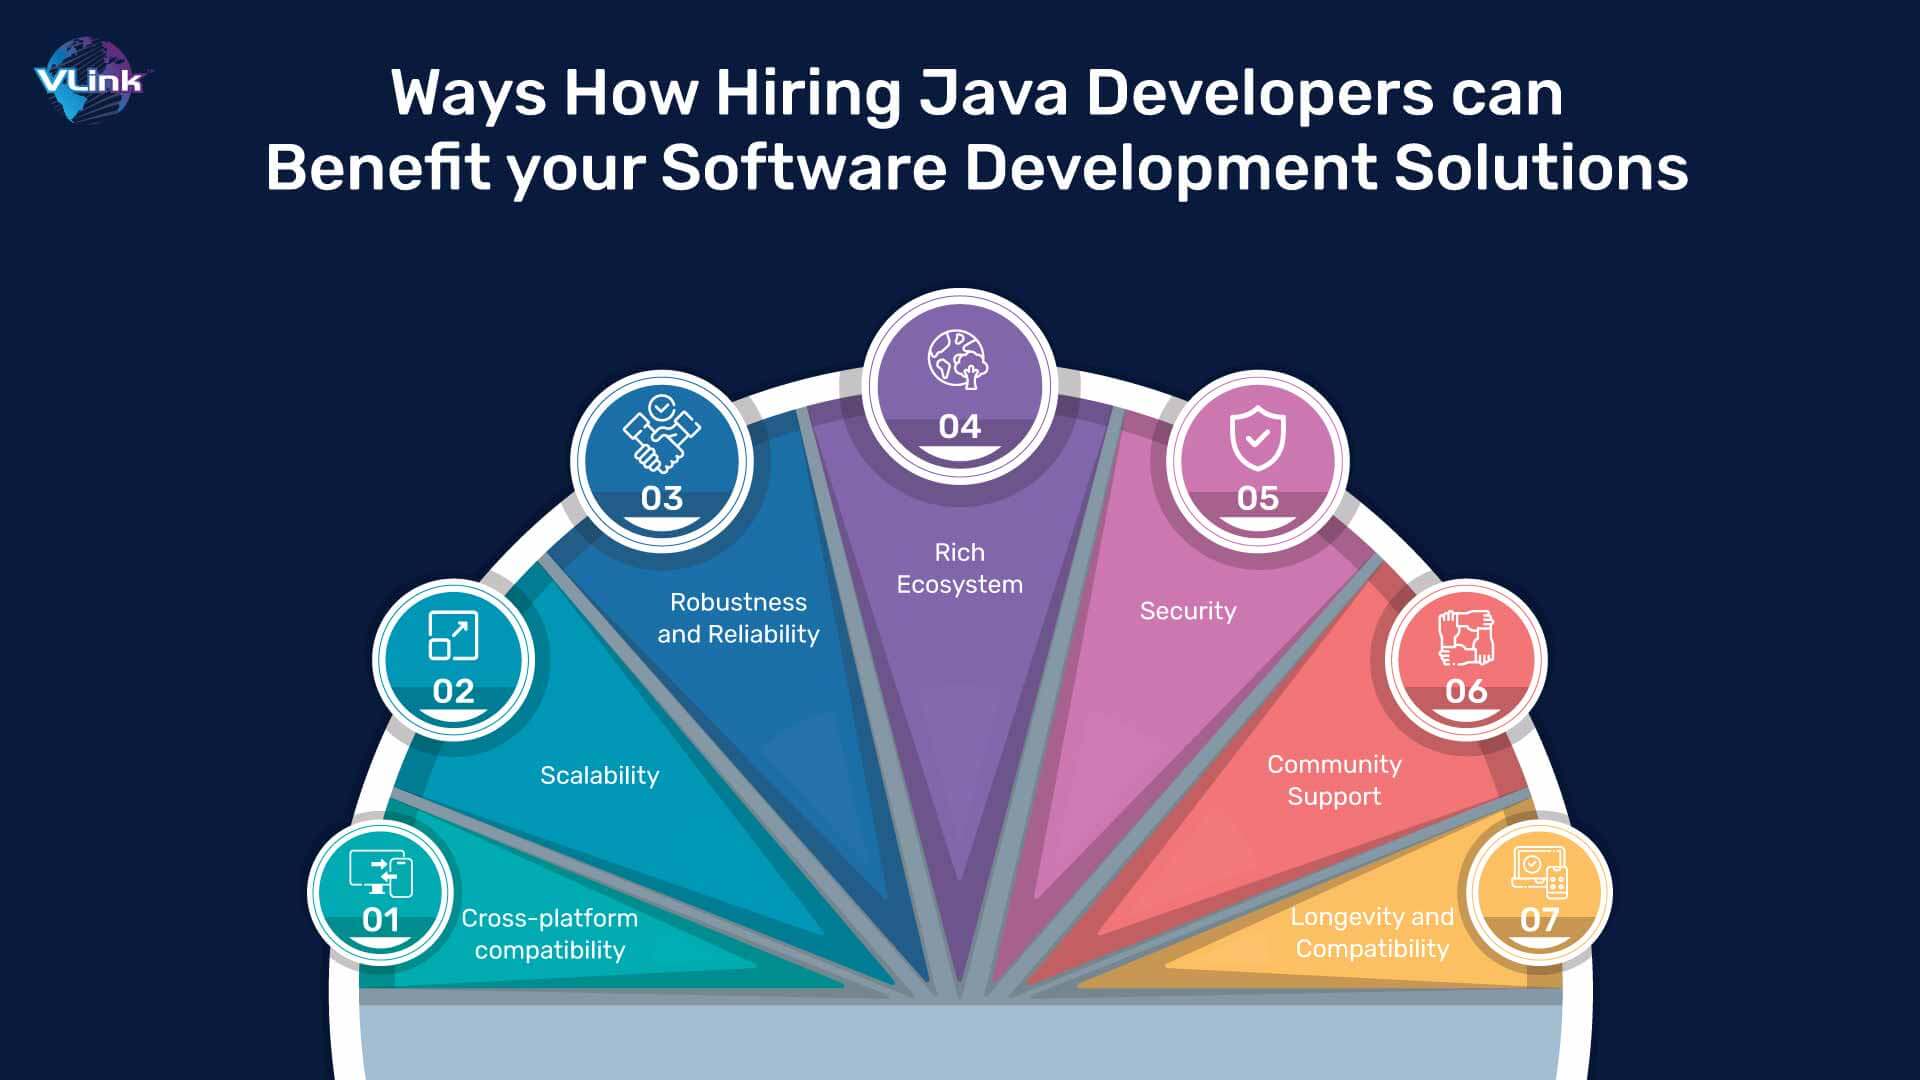 Ways How Hiring Java Developers can Benefit your Software Development Solutions